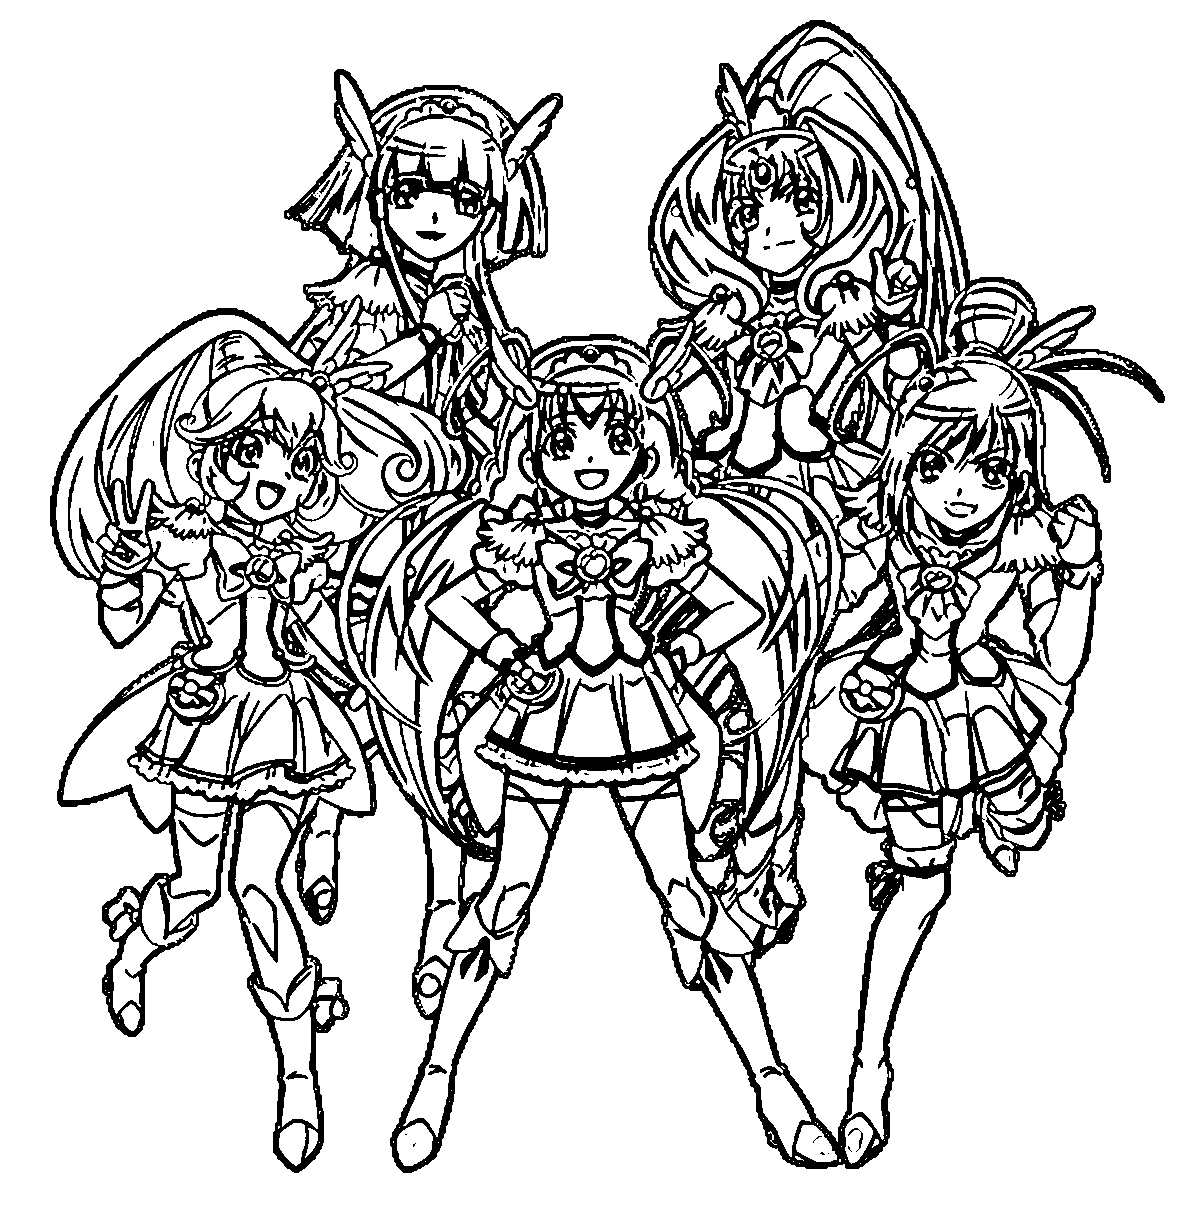 Glitter Force Coloring Pages Printable / Glitter Force Coloring Online Play For Free At Poki Com